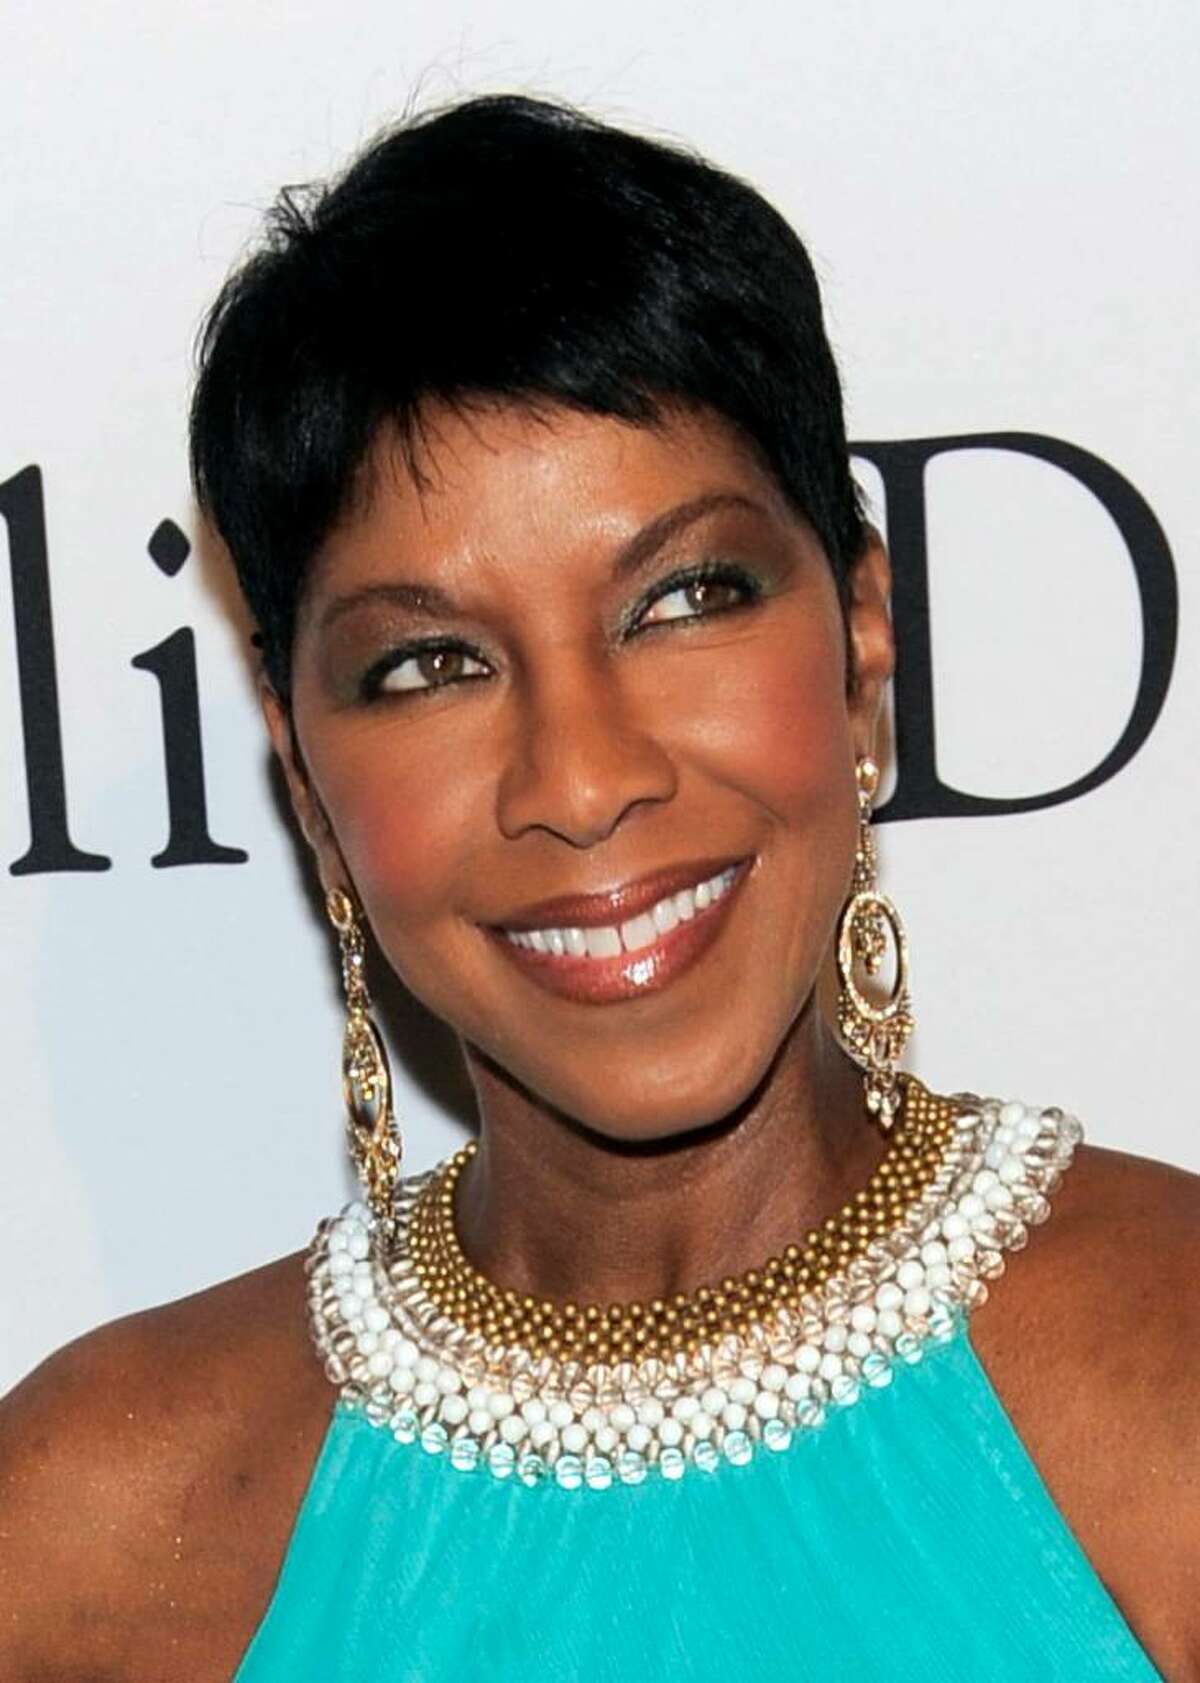 Singer Natalie Cole arrives at the annual Pre-GRAMMY Gala presented by The Recording Academy and Clive Davis on Saturday, Jan. 30, 2010 at The Beverly Hilton Hotel in Beverly, Hills, California. (AP Photo/Chris Pizzello)